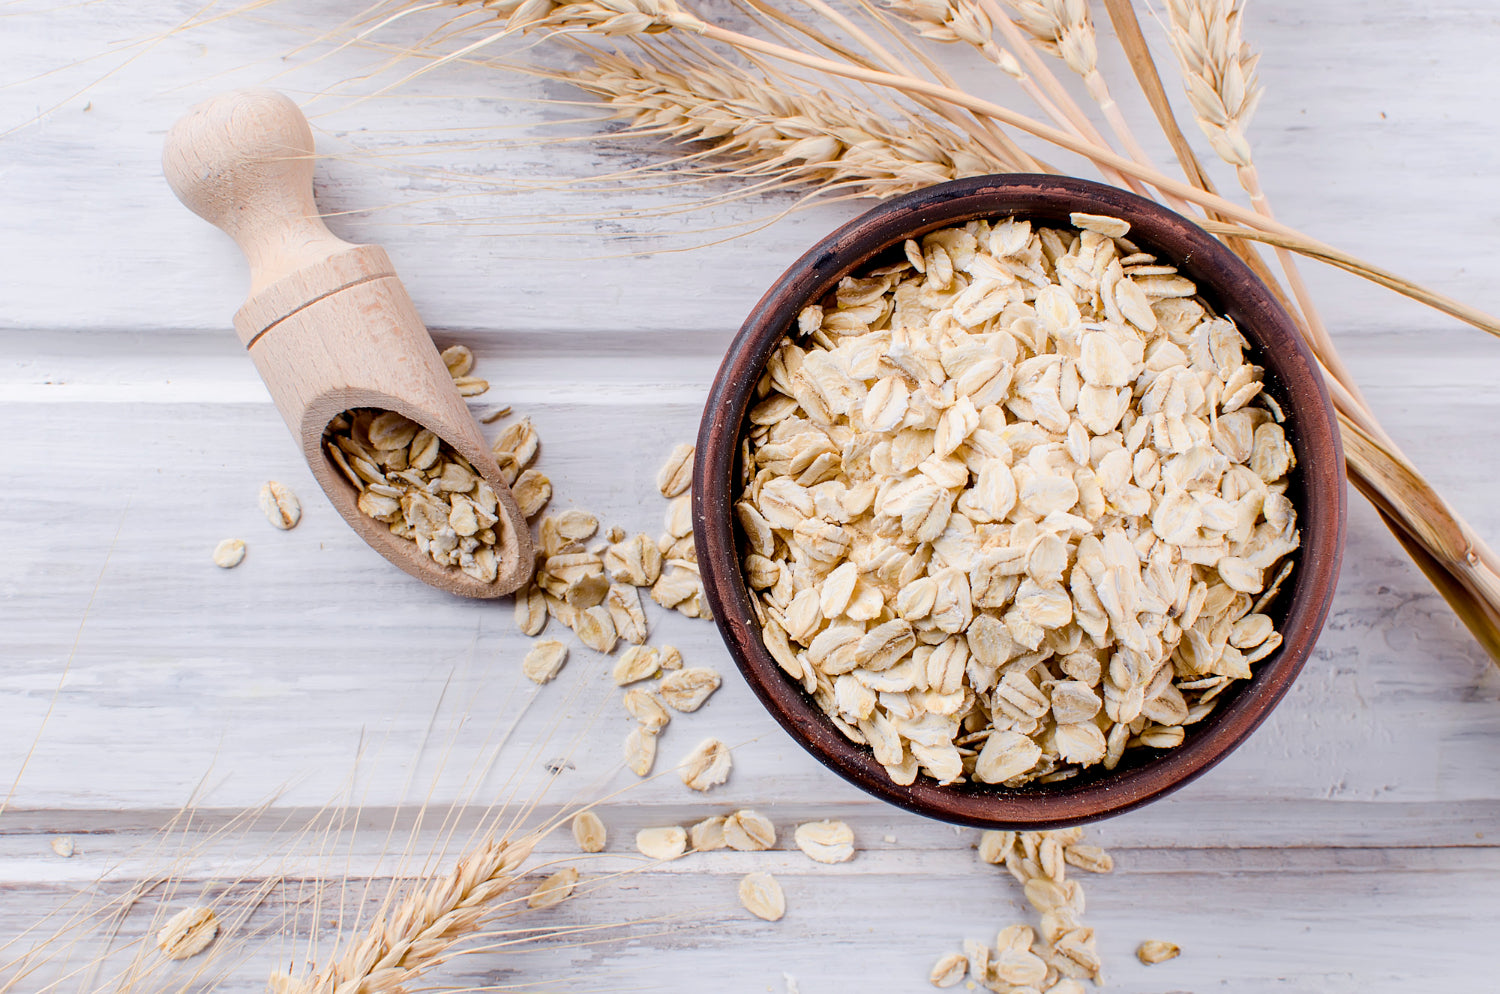 Rolled Oats vs. Quick Oats: main Difference